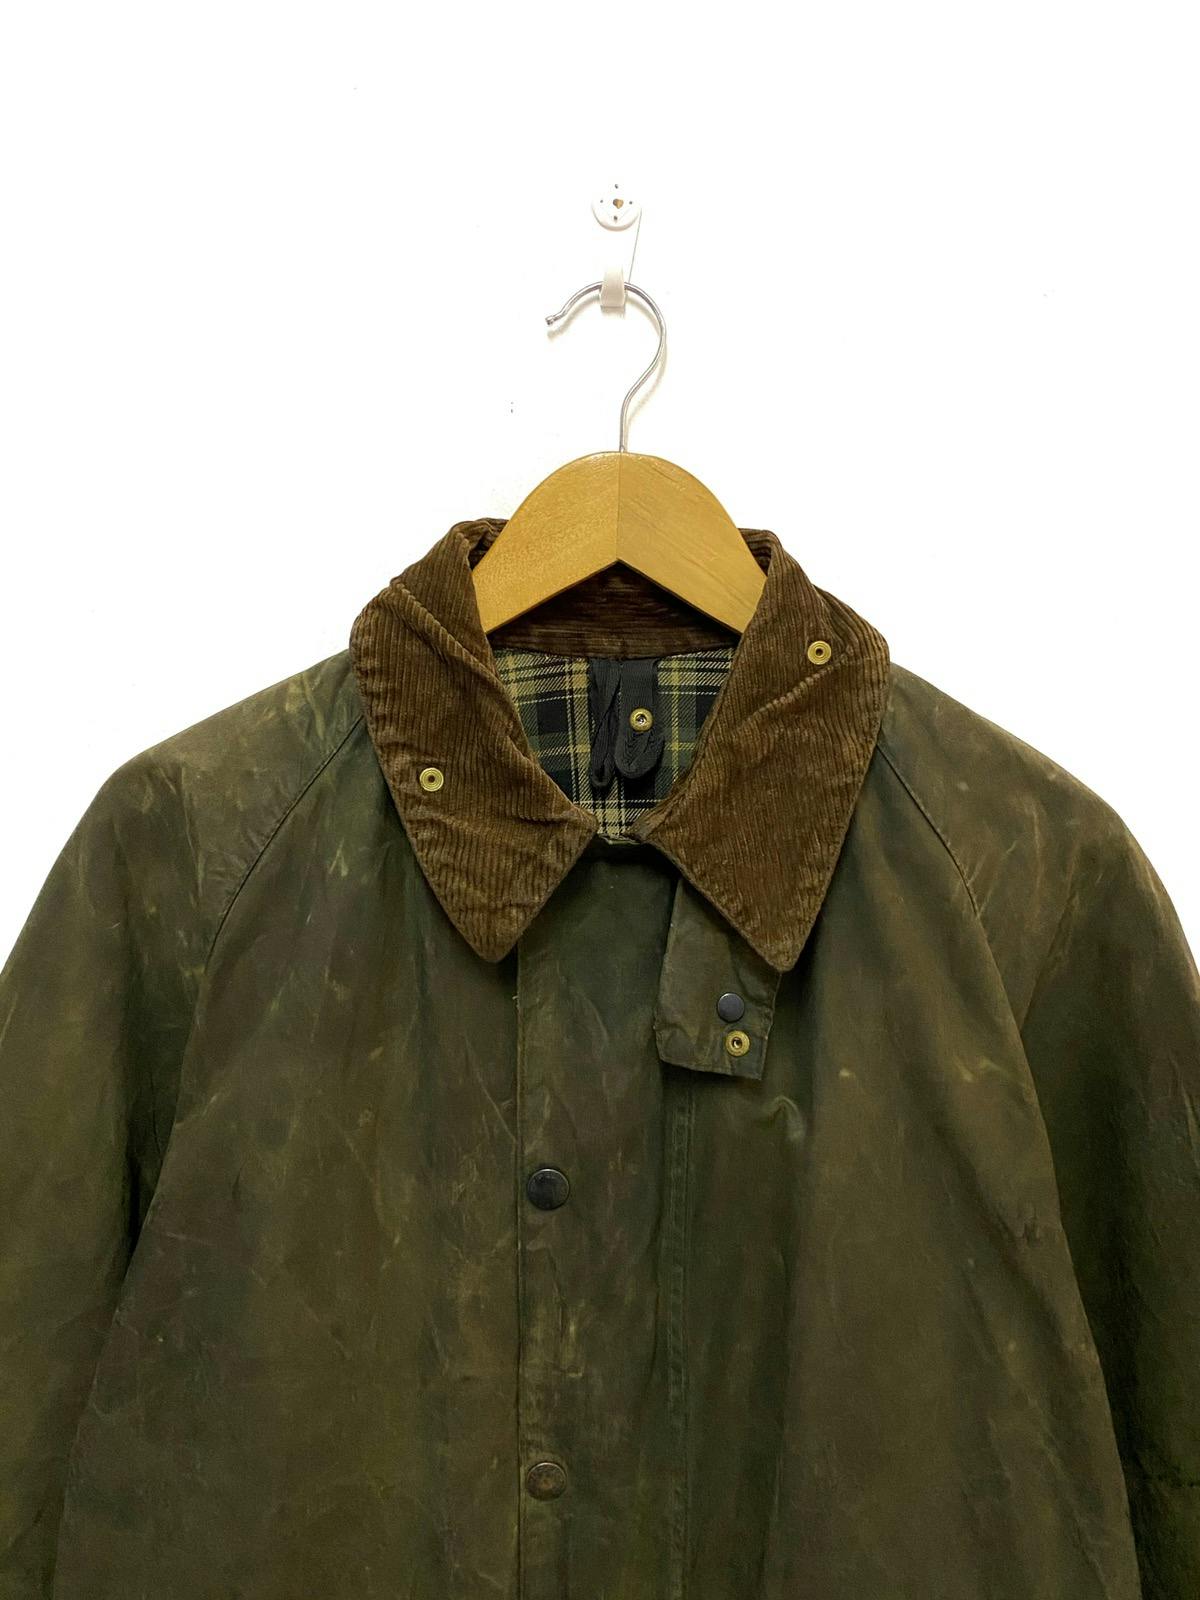 Barbour Gamefair Waxed Jacket Made in England - 2